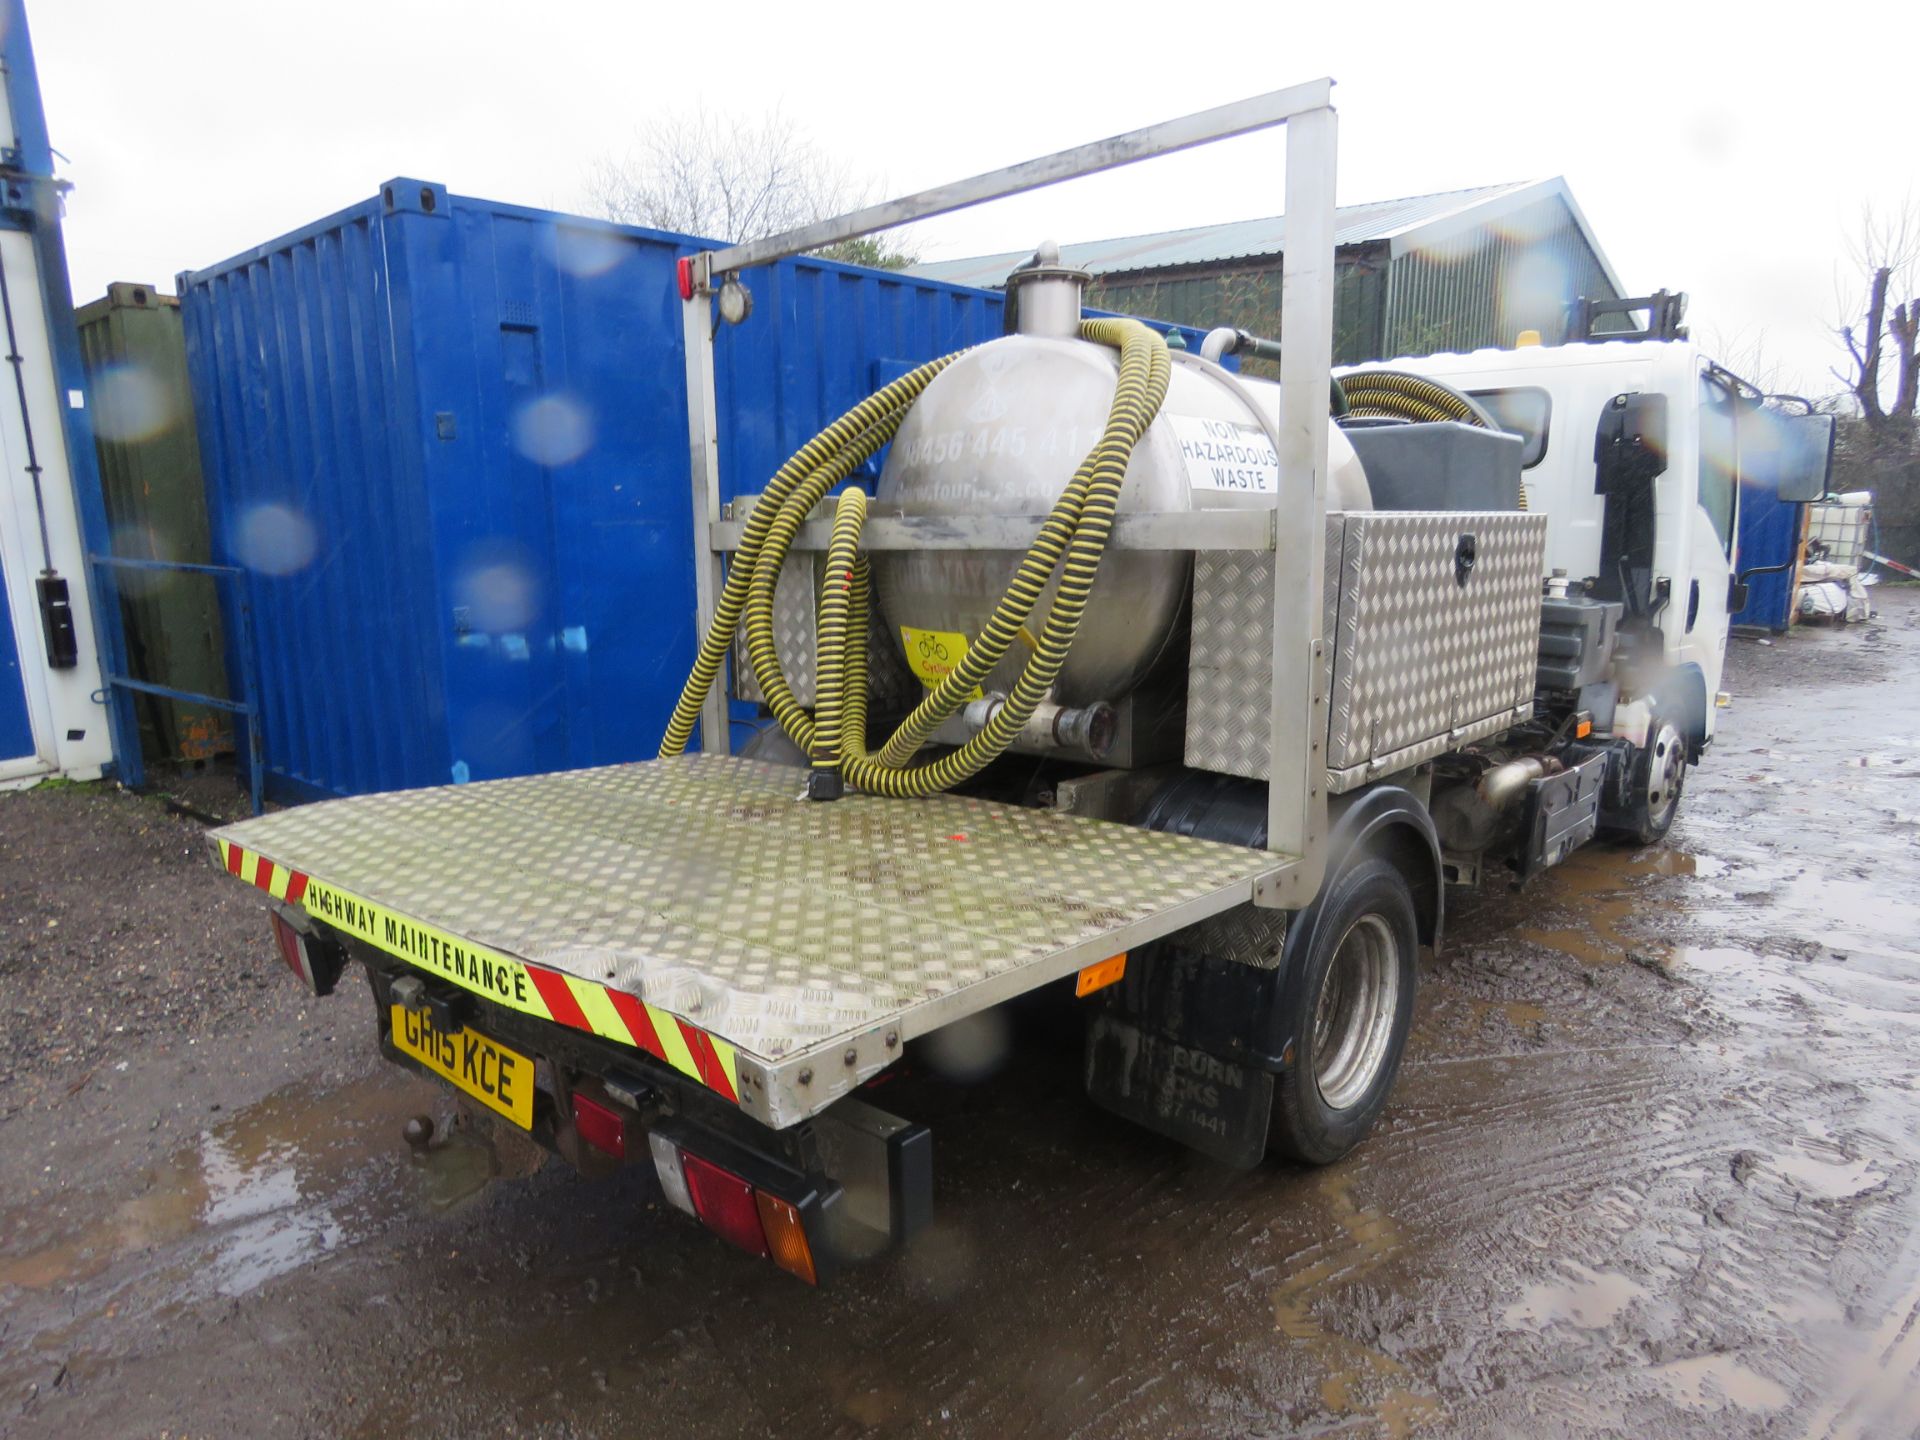 ISUZU N35.150 PORTABLE TOILET SERVICE VEHICLE TANKER TRUCK REG:GH15 KCE. 3500KG RATED CAPACITY. WITH - Image 7 of 10